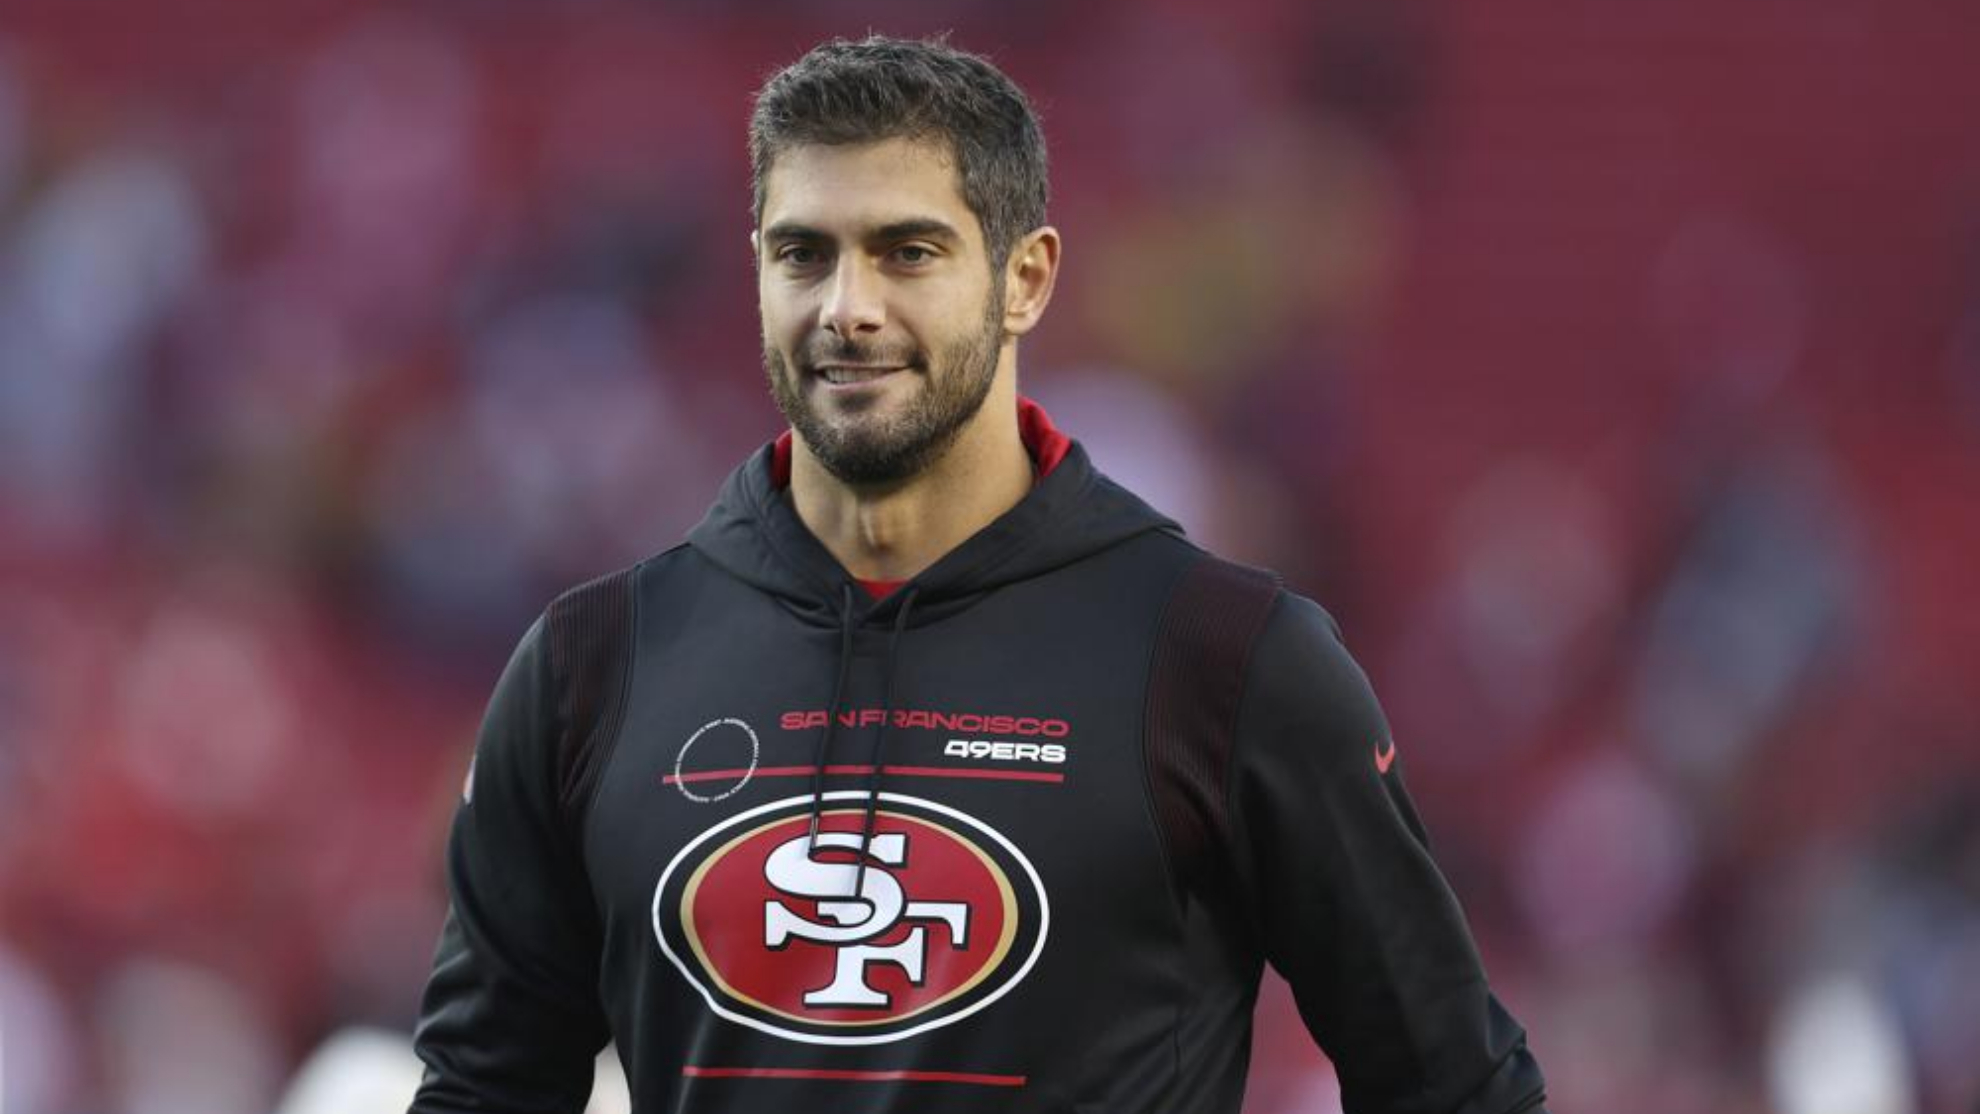 Jimmy Garoppolo walks off the field after the 49ers defeated the Houston Texans.